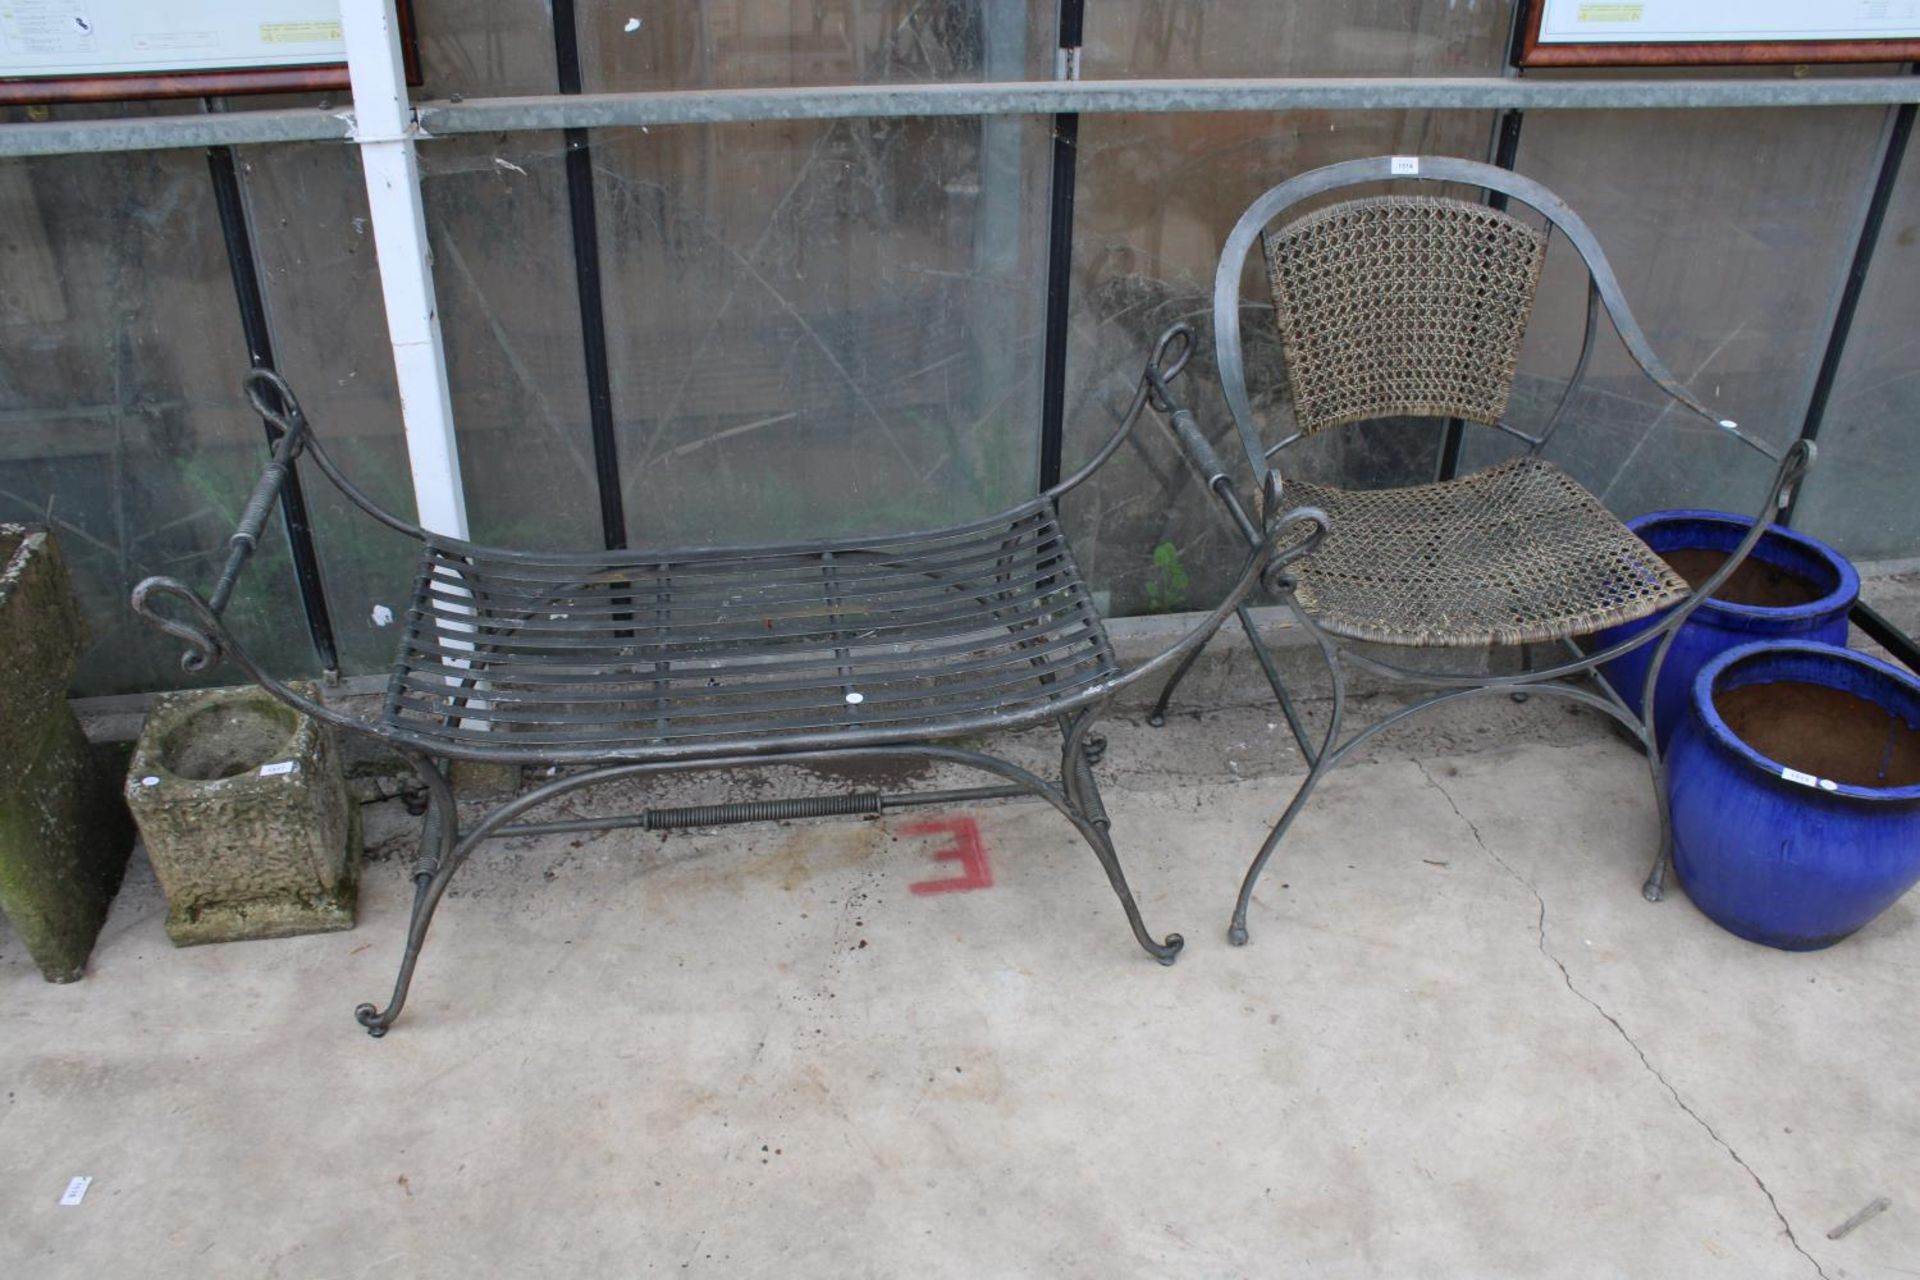 A METAL GARDEN CHAIR WITH RATTAN SEAT AND BACK AND A SIMILAR HEAVY METAL BENCH